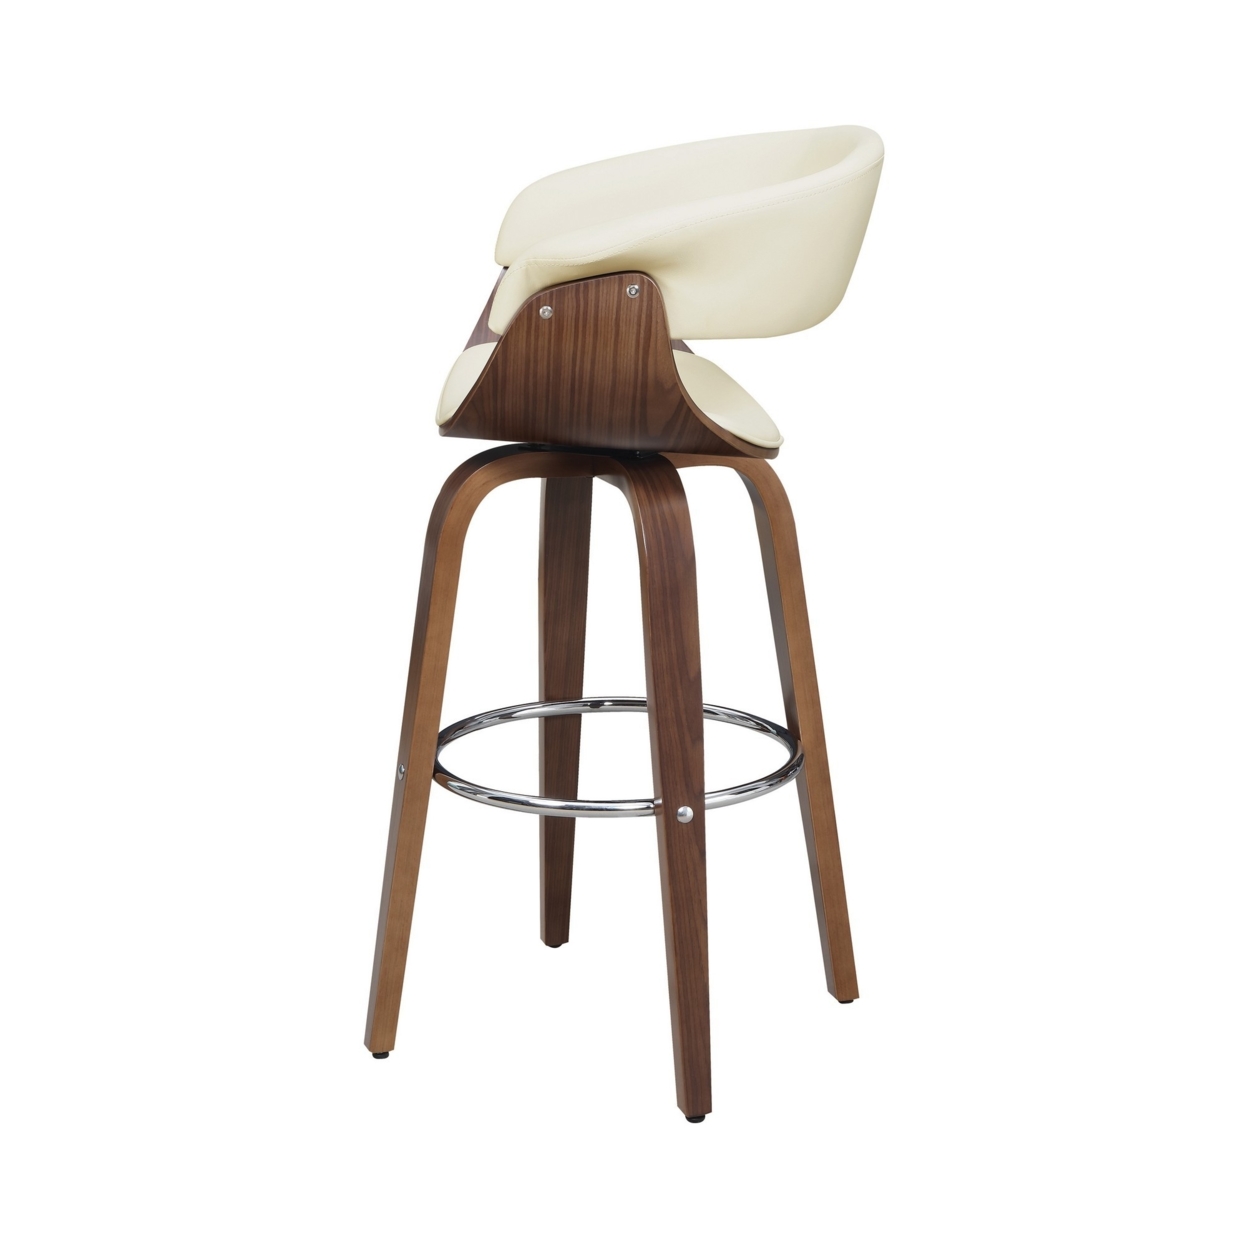 Barstool With Counter Open Design And Wooden Legs, Cream And Brown- Saltoro Sherpi